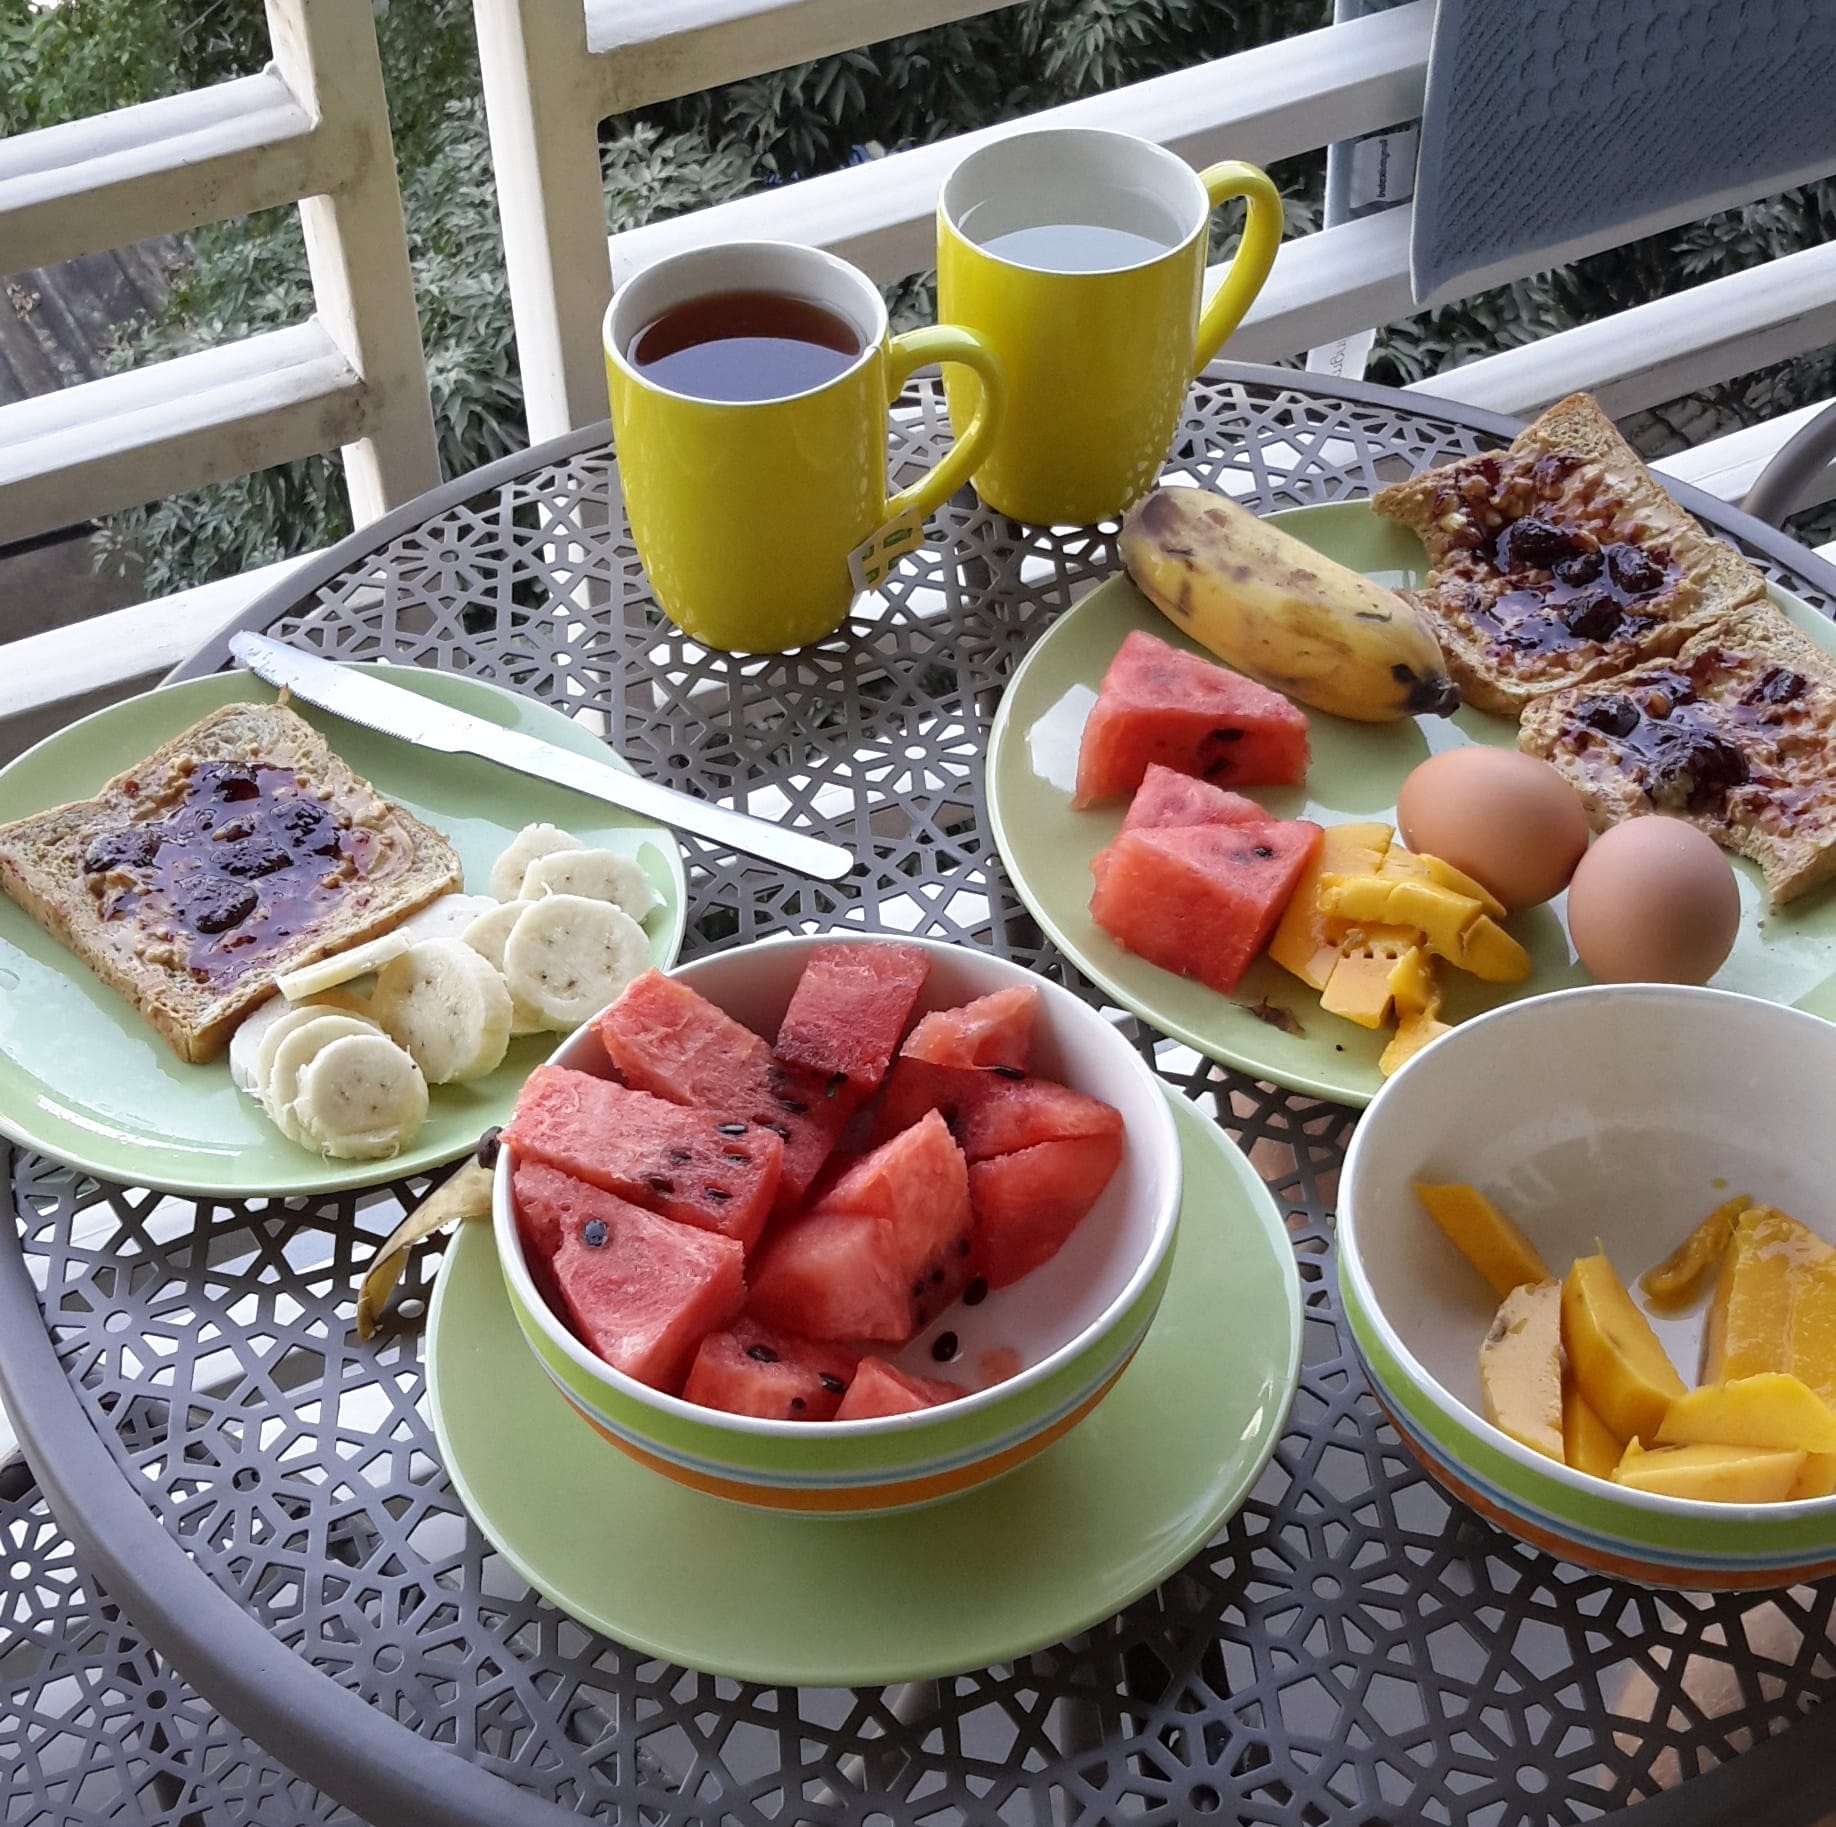 Typical breakfast at home in Chiang Mai, Thailand